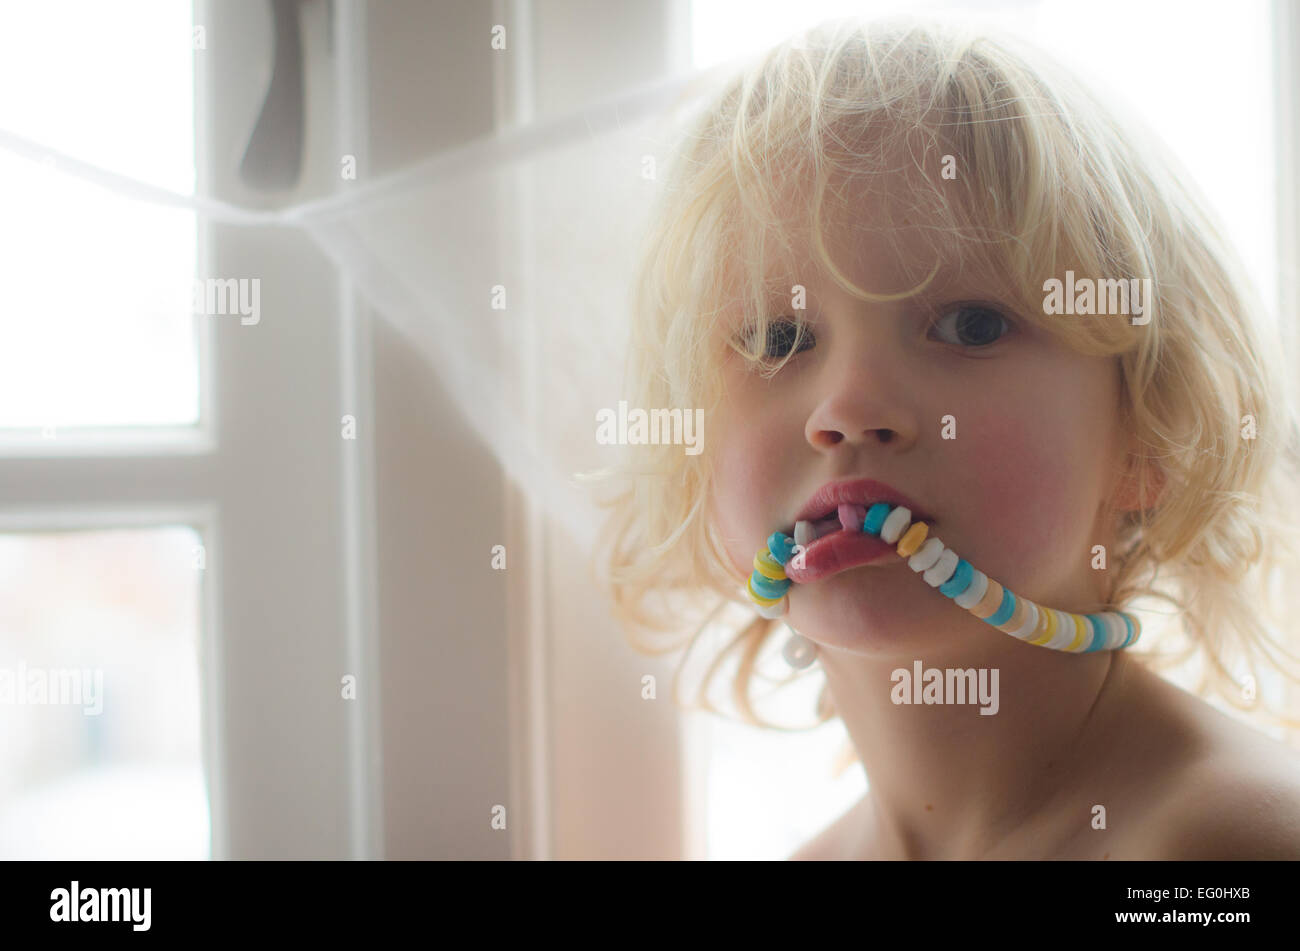 Portrait of boy eating candy necklace Stock Photo